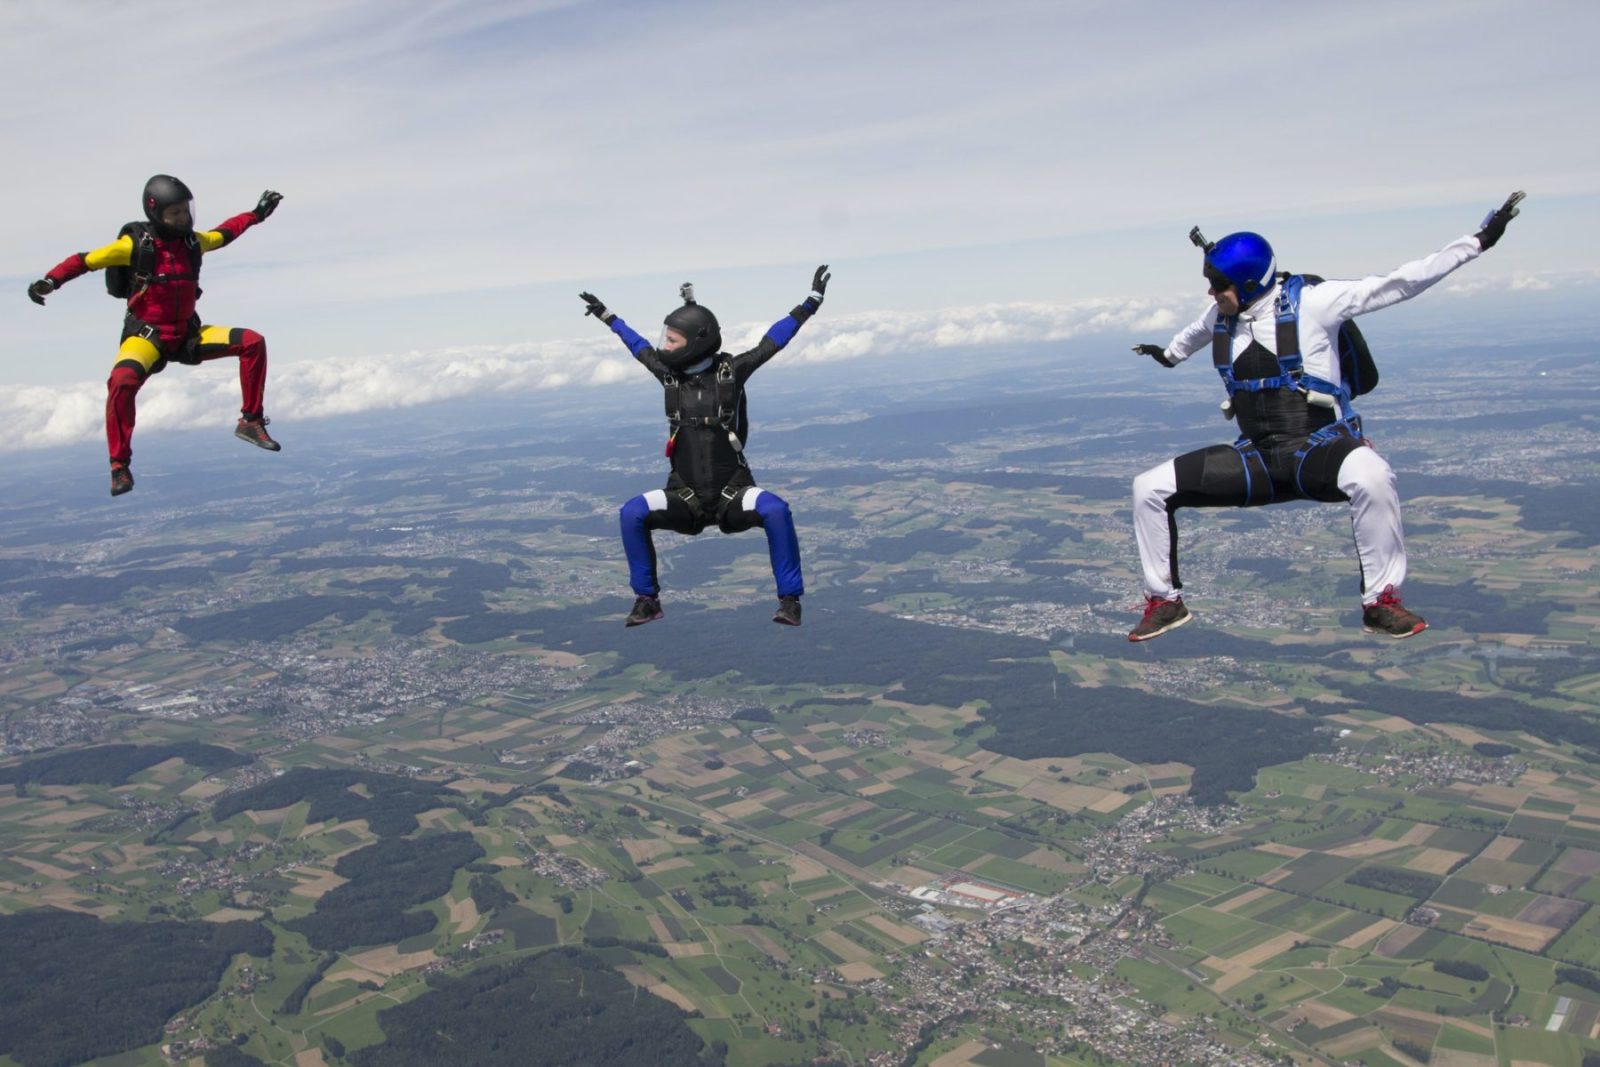 Team of three skydivers in sit fly position over Buttwil, Luzern, Switzerland